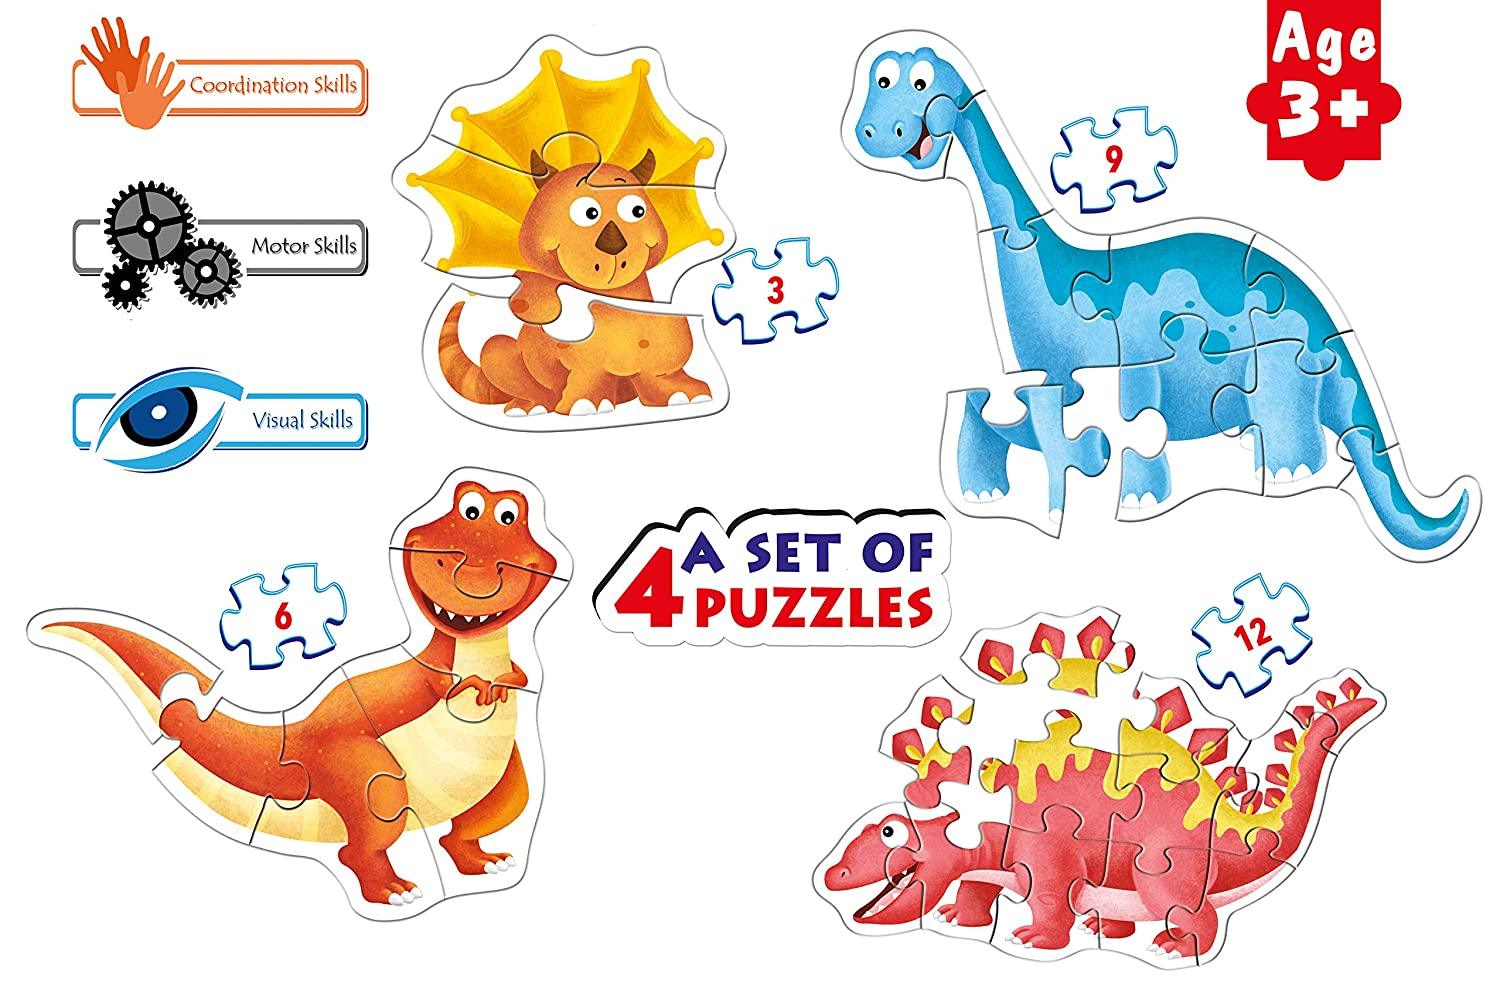 Frank Dinosaurs Shaped First Puzzles (3,6,9,12 Pcs)